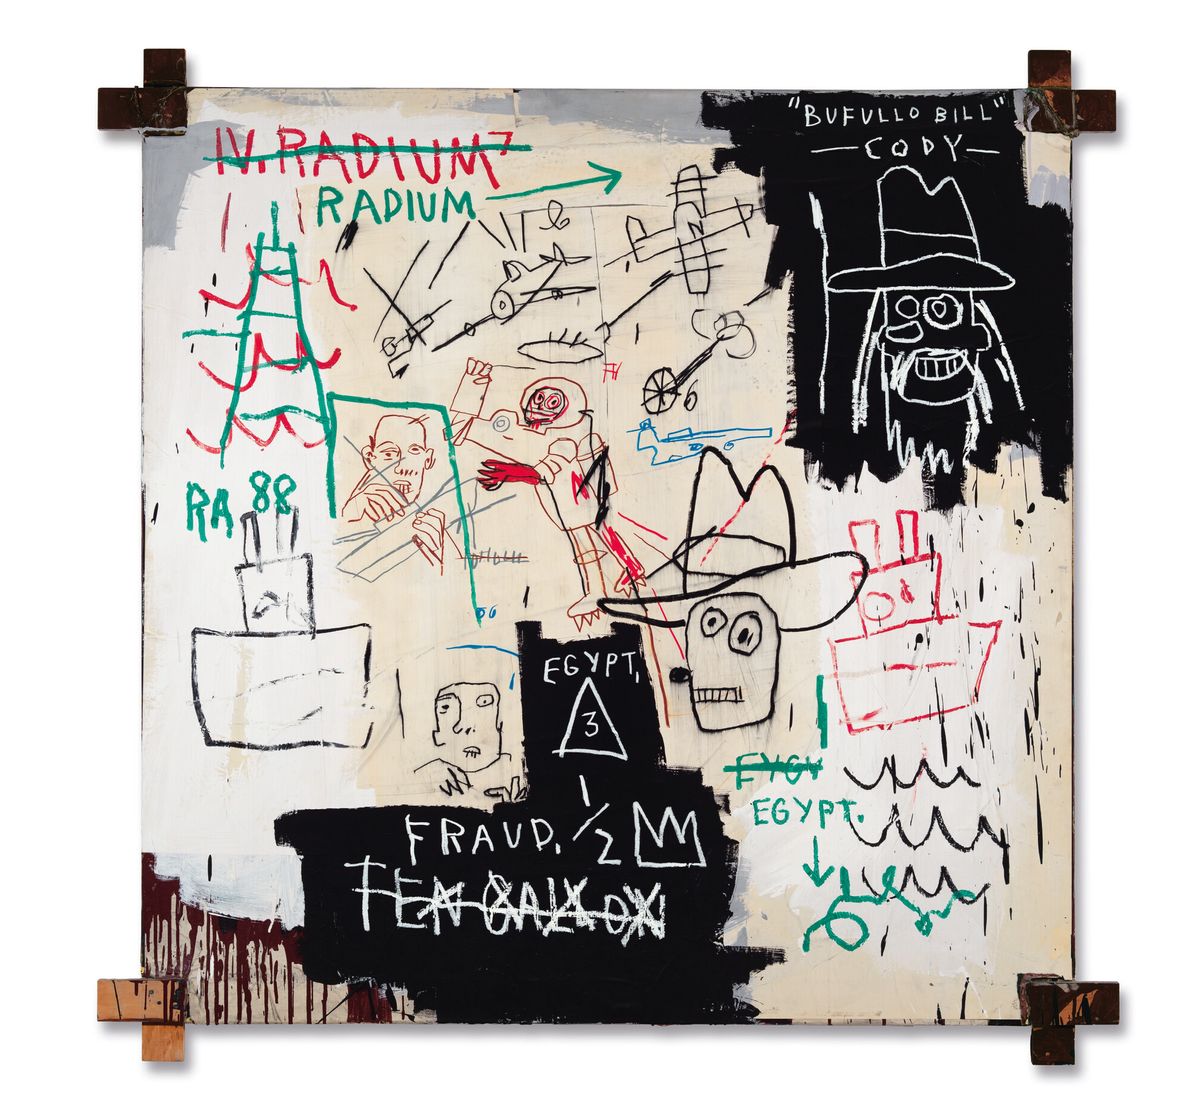 Jean-Michel Basquiat’s 1982 work Future Sciences Versus the Man fetched £10.4m (with fees) at Christie's

Photo: Jacek Gancarz